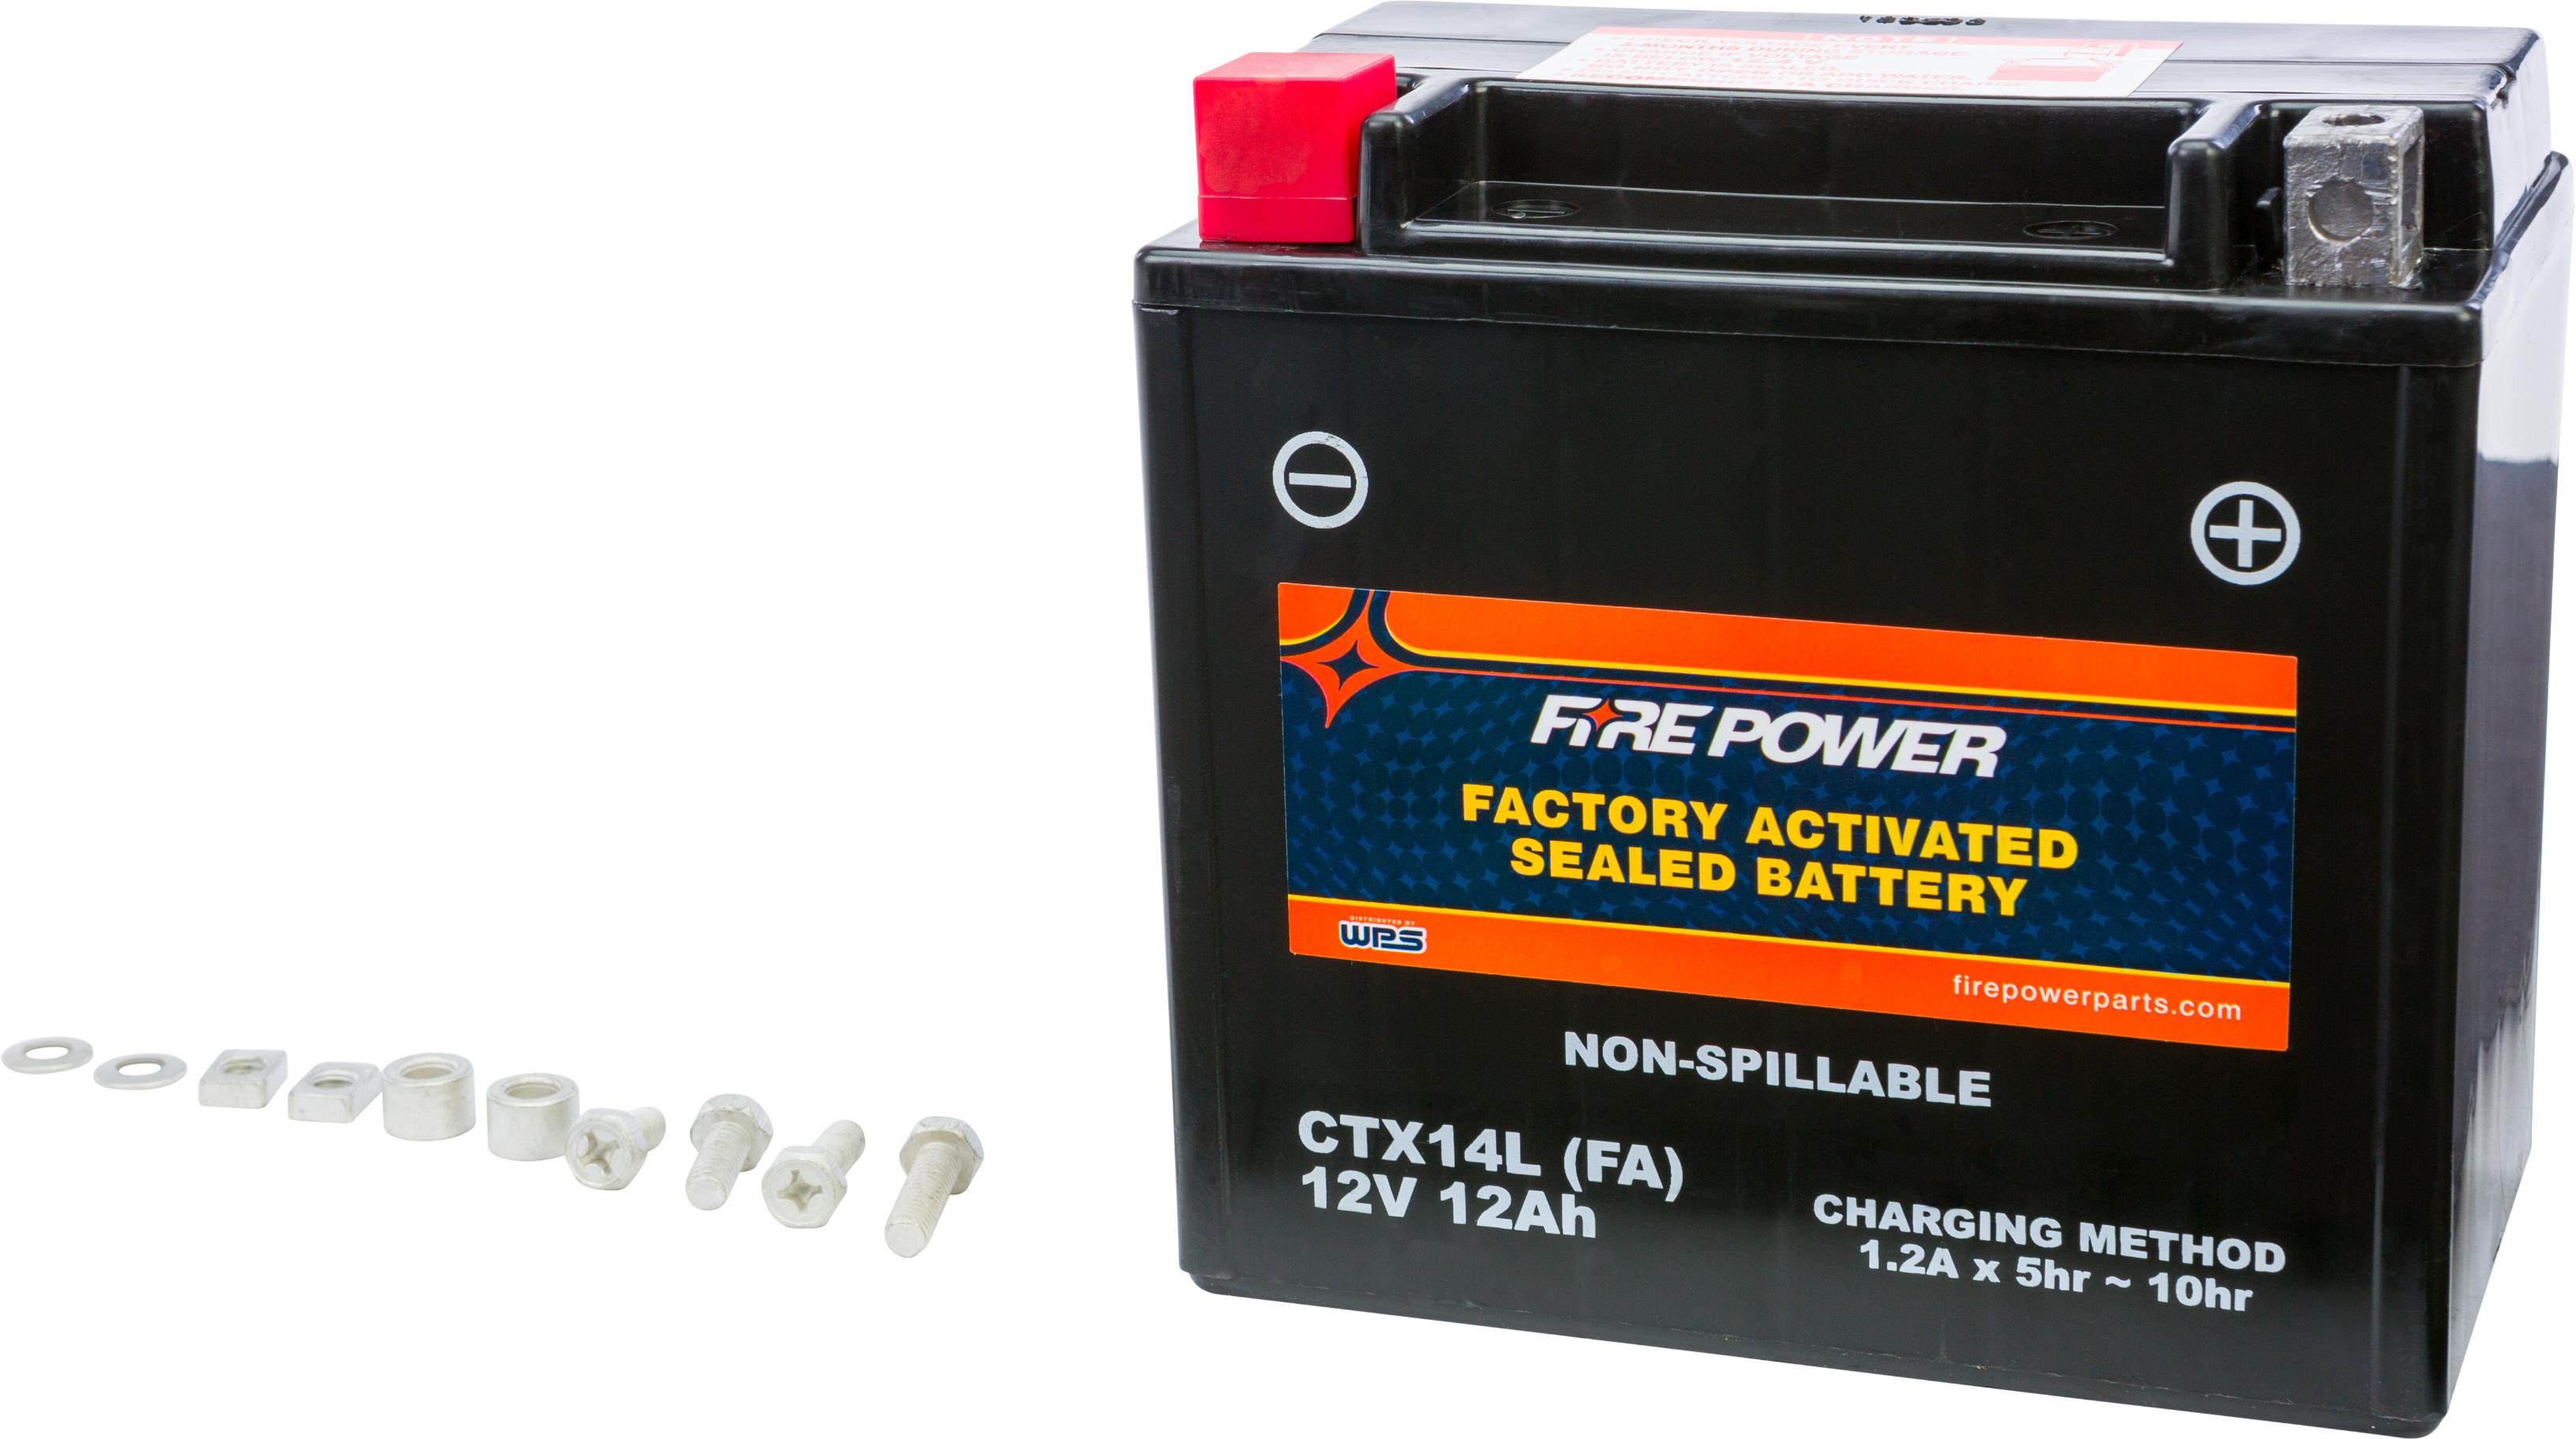 Fire Power - Battery Ctx14l Sealed Factory Activated - CTX14L-BS(FA)